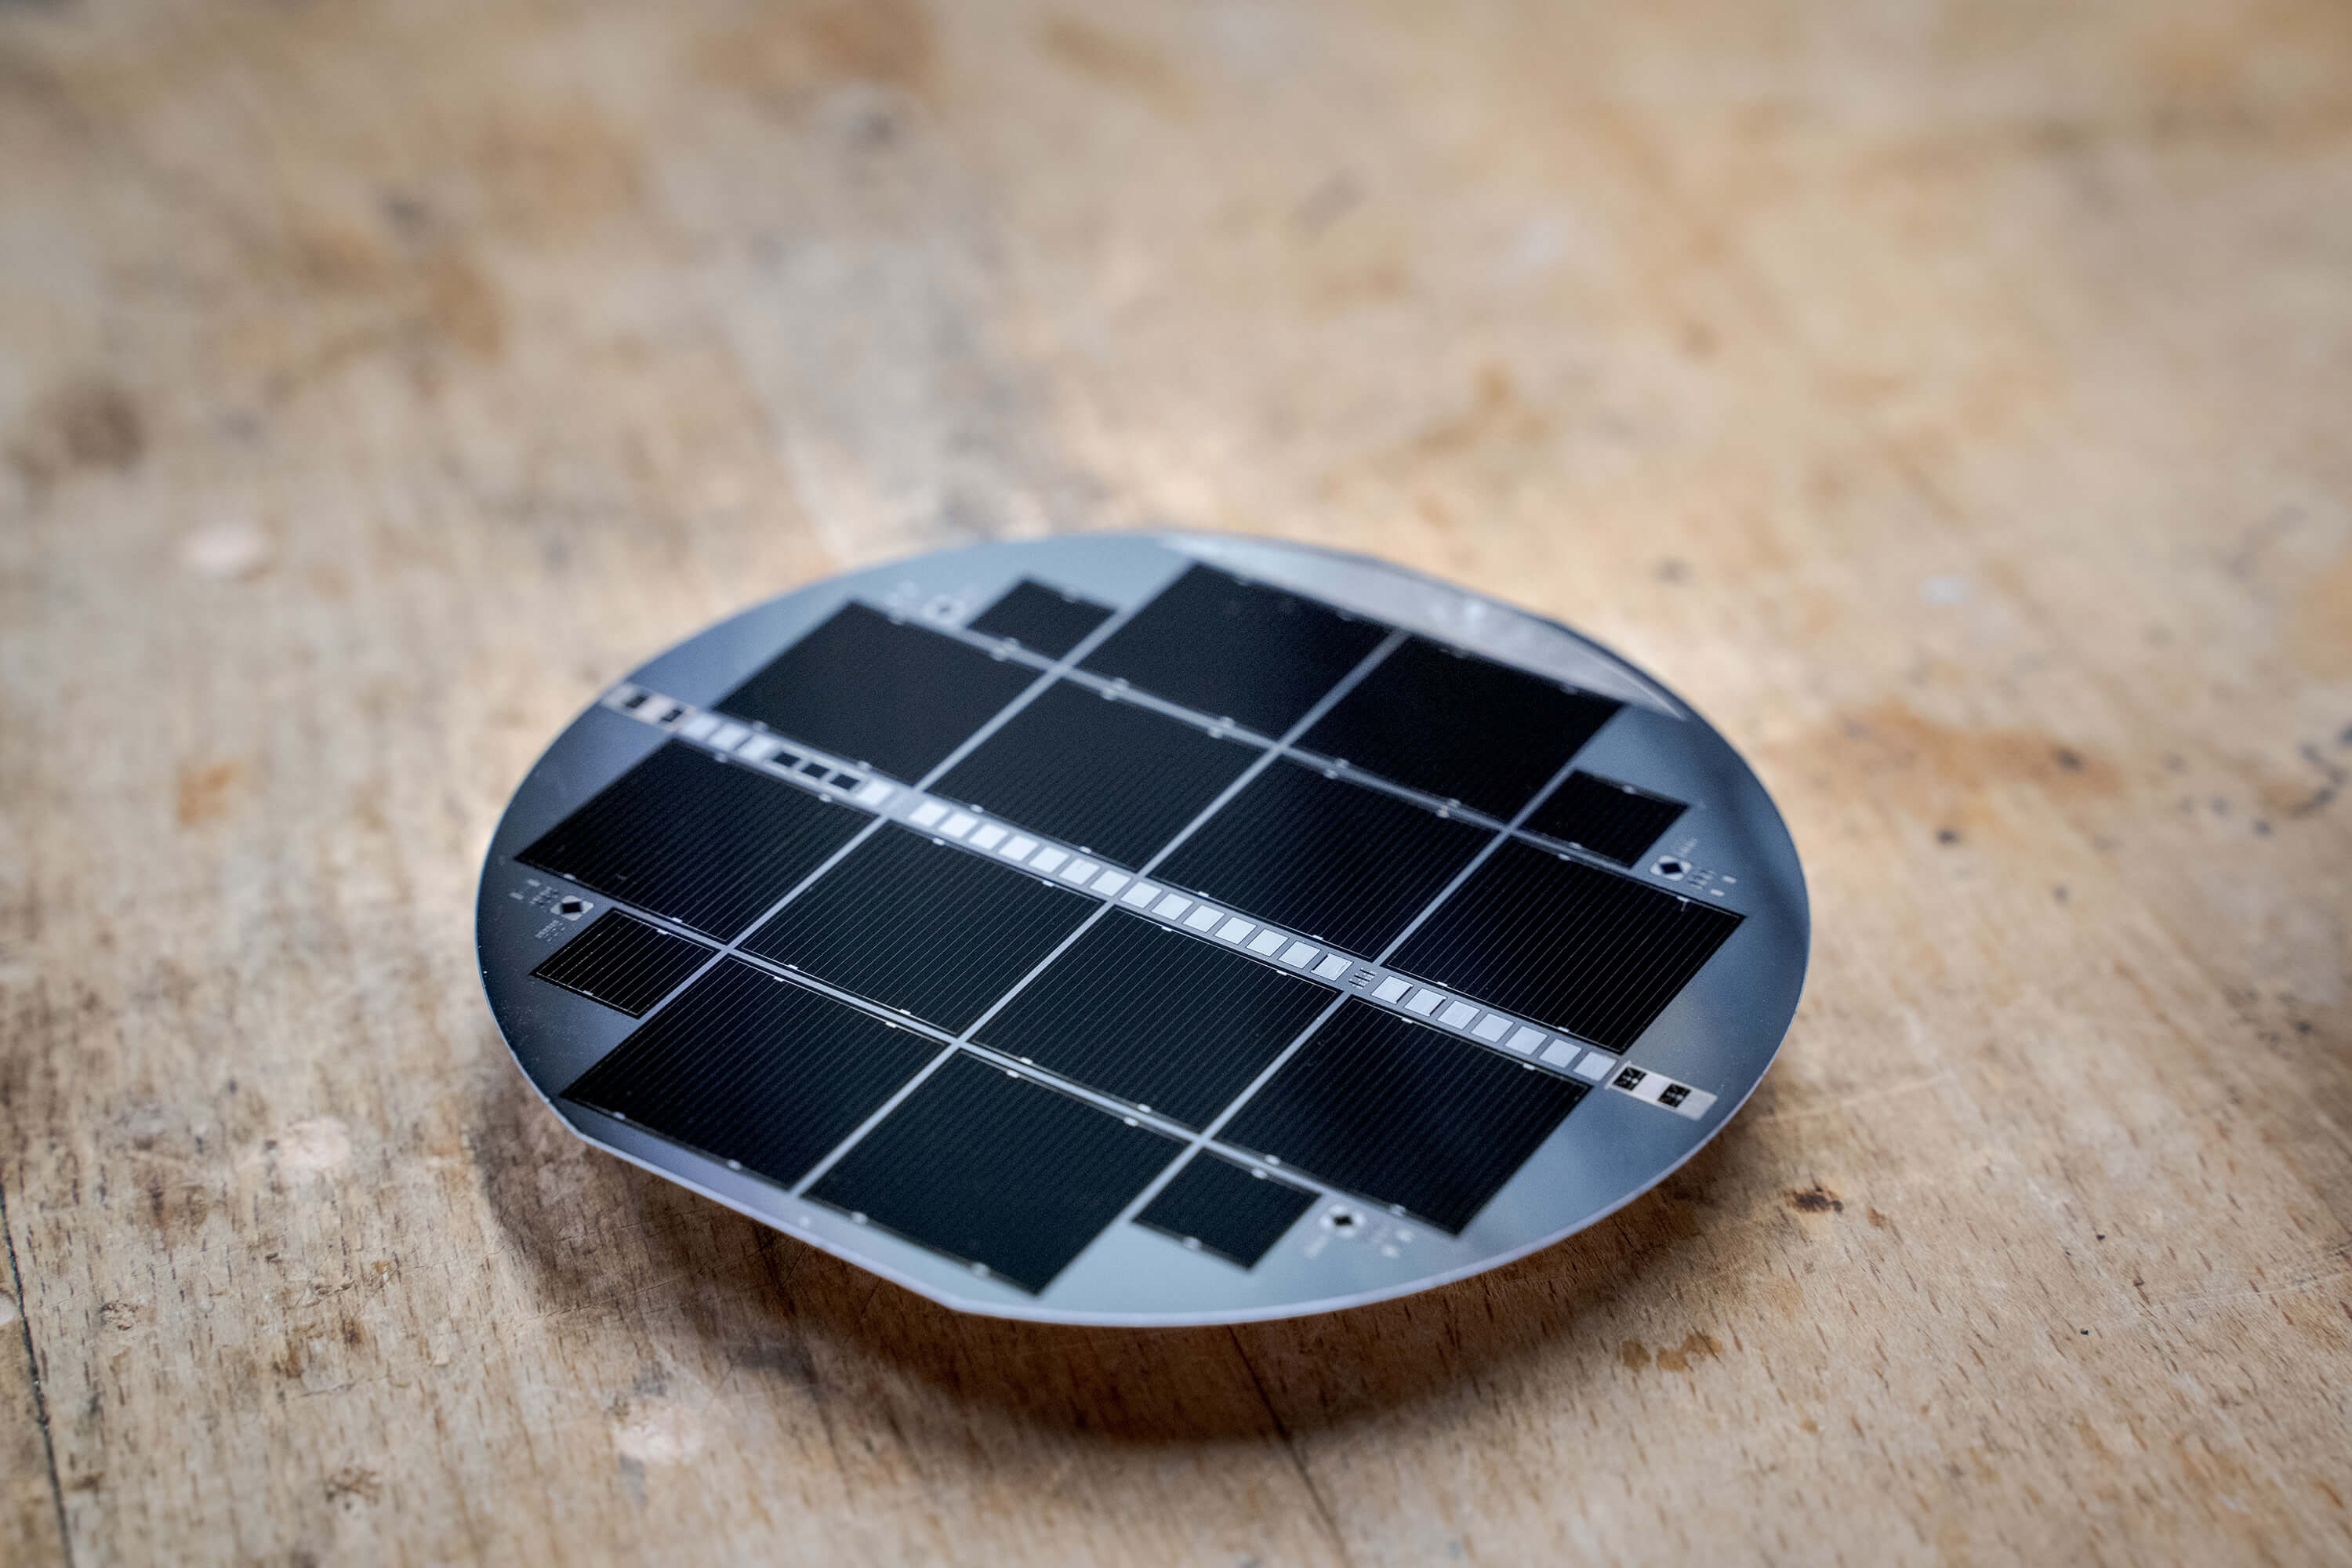 Several III-V tandem solar cells on a silicon substrate with 10 cm diameter.  